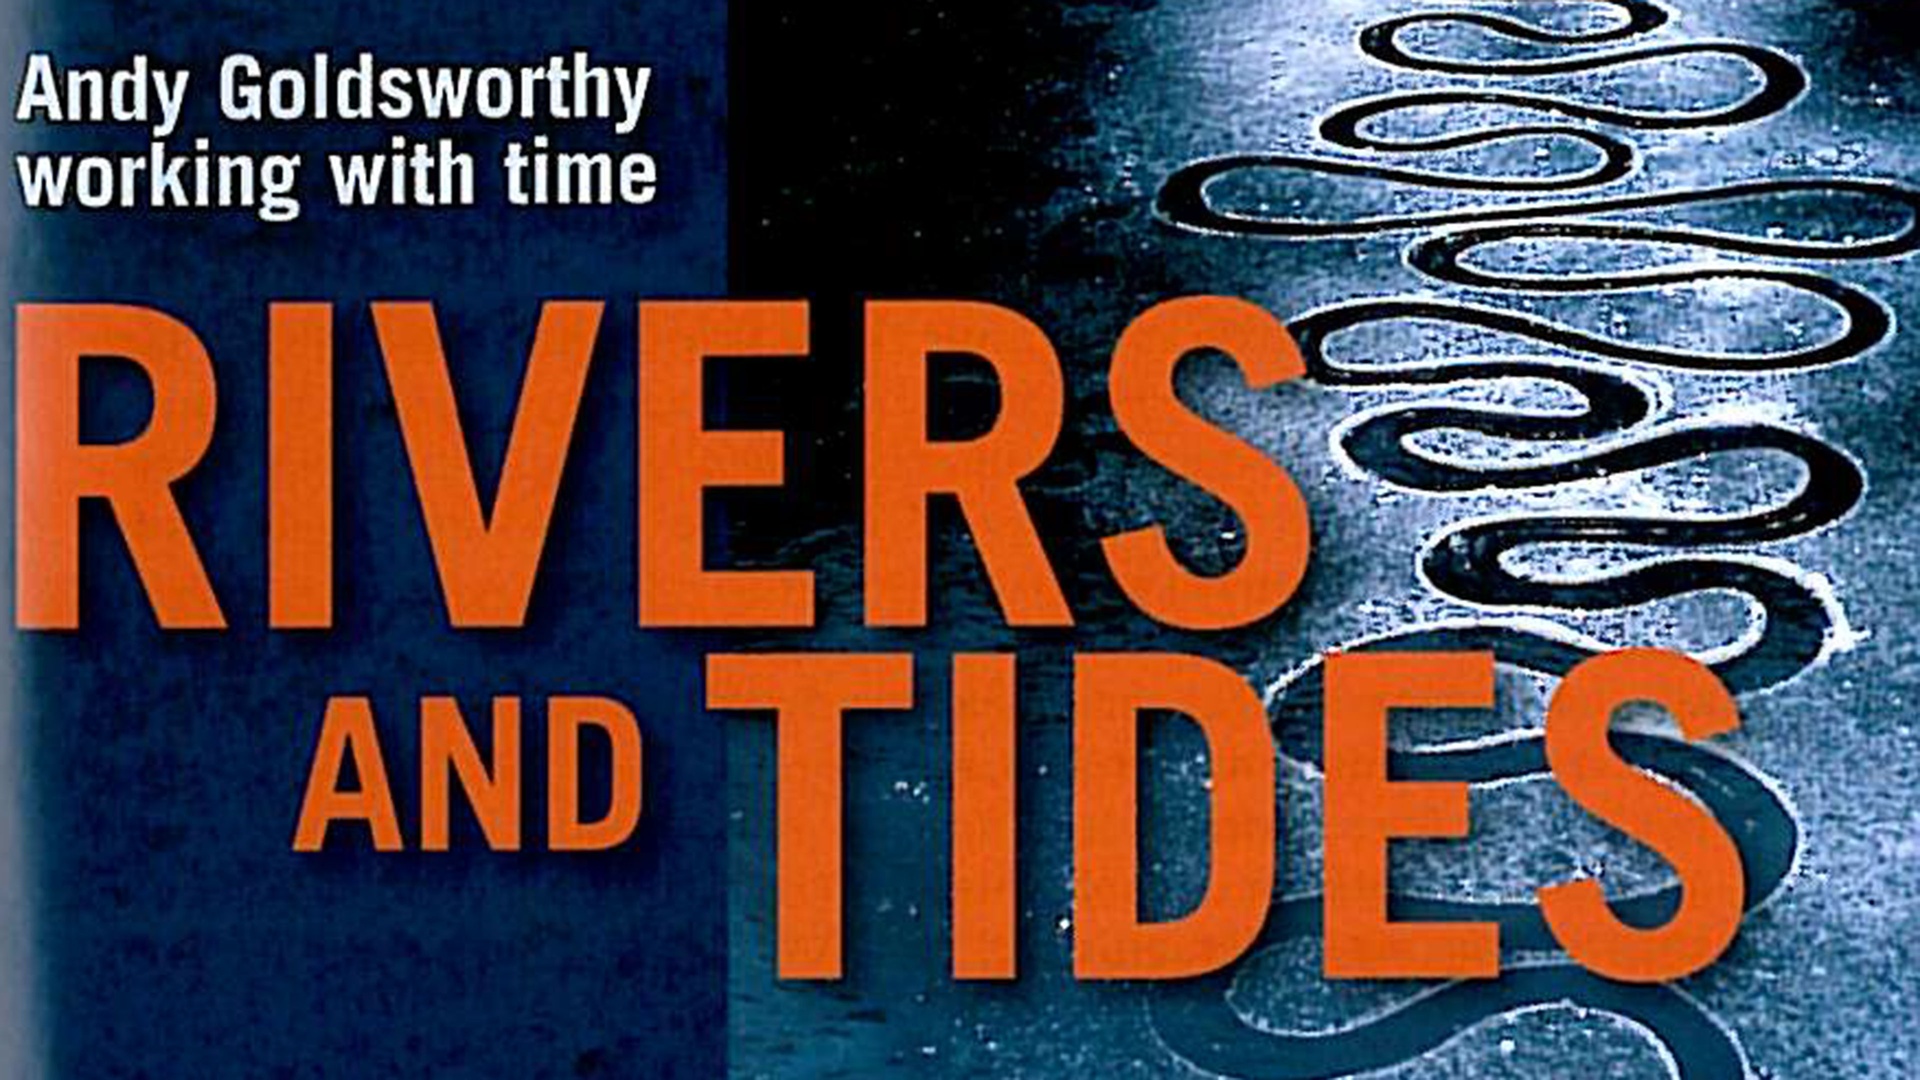 RIVERS AND TIDES: Andy Goldsworthy working with time